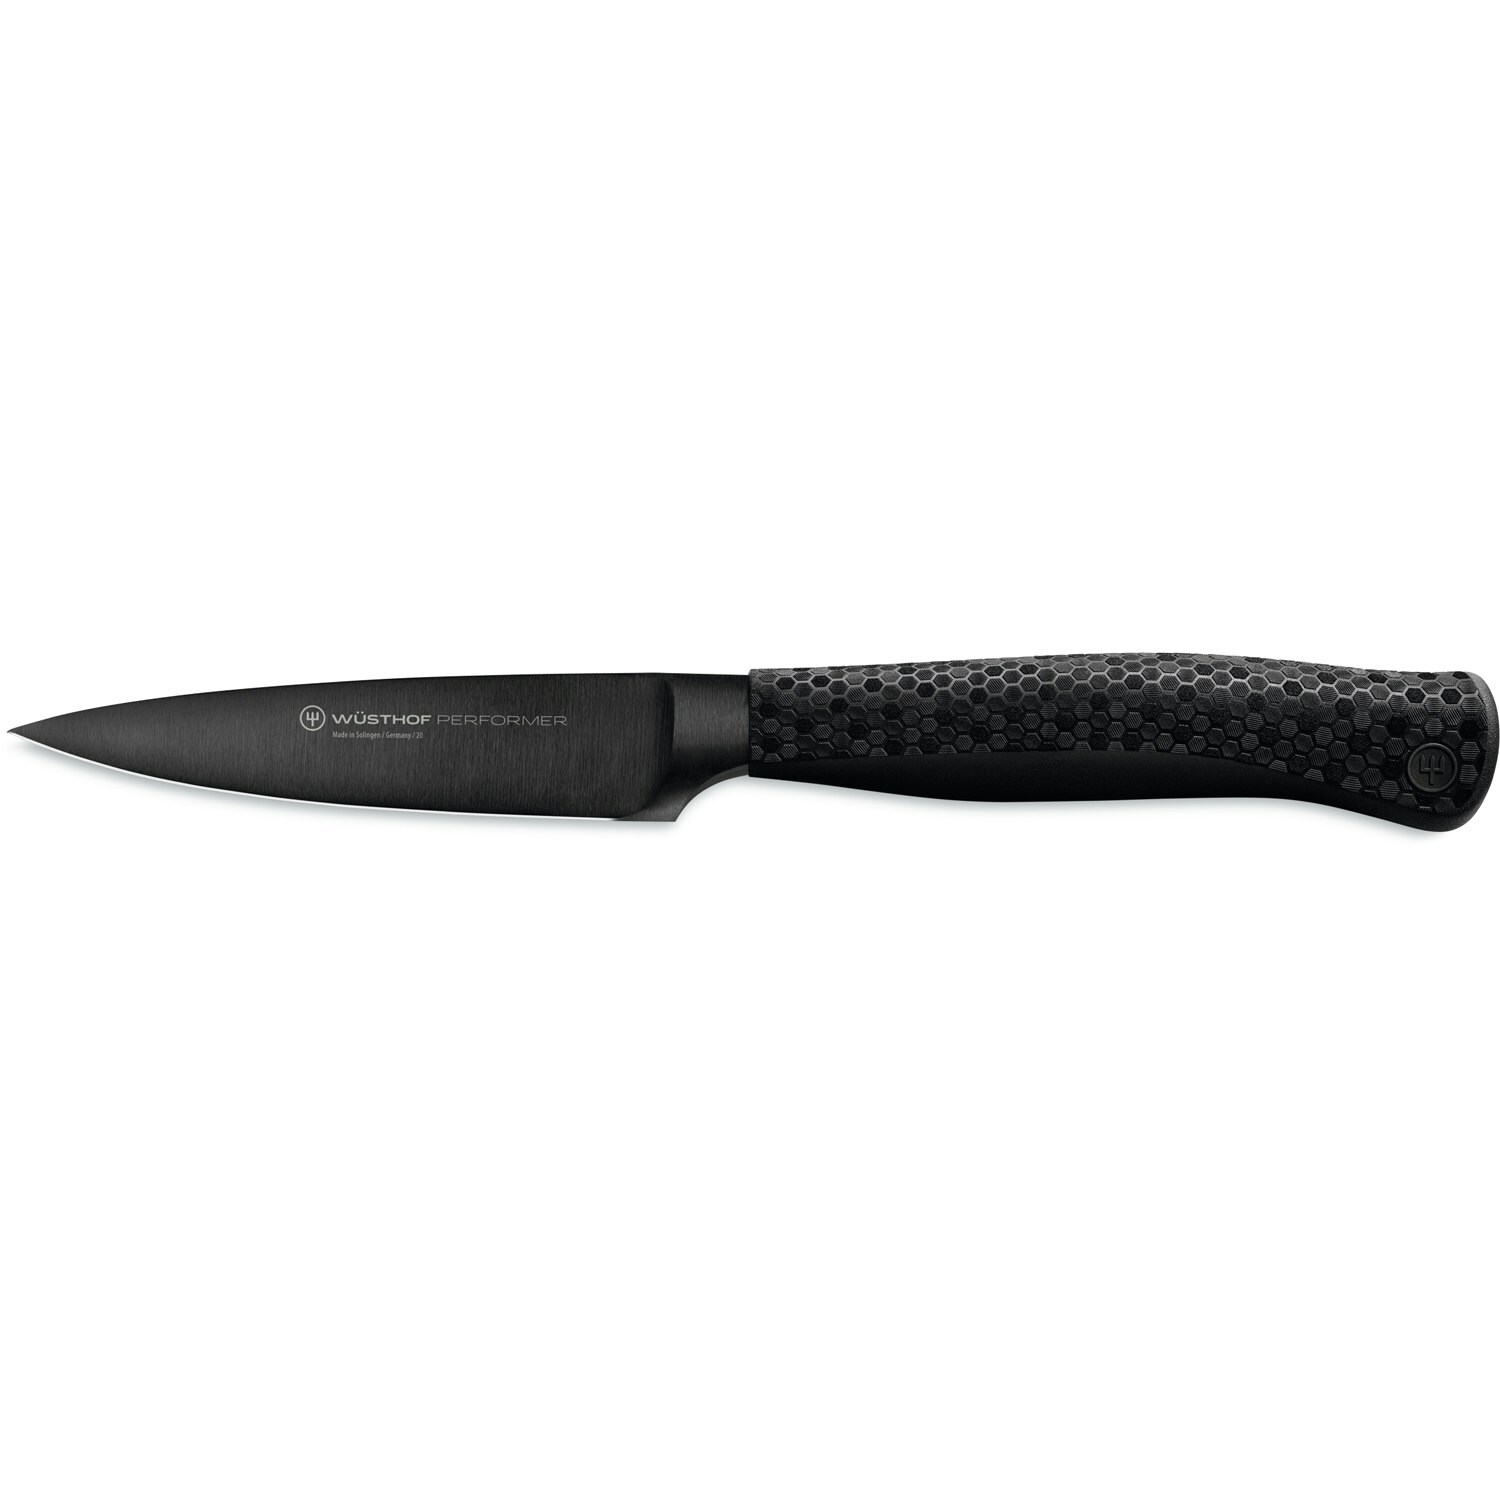 Performer 8 Chef's Knife